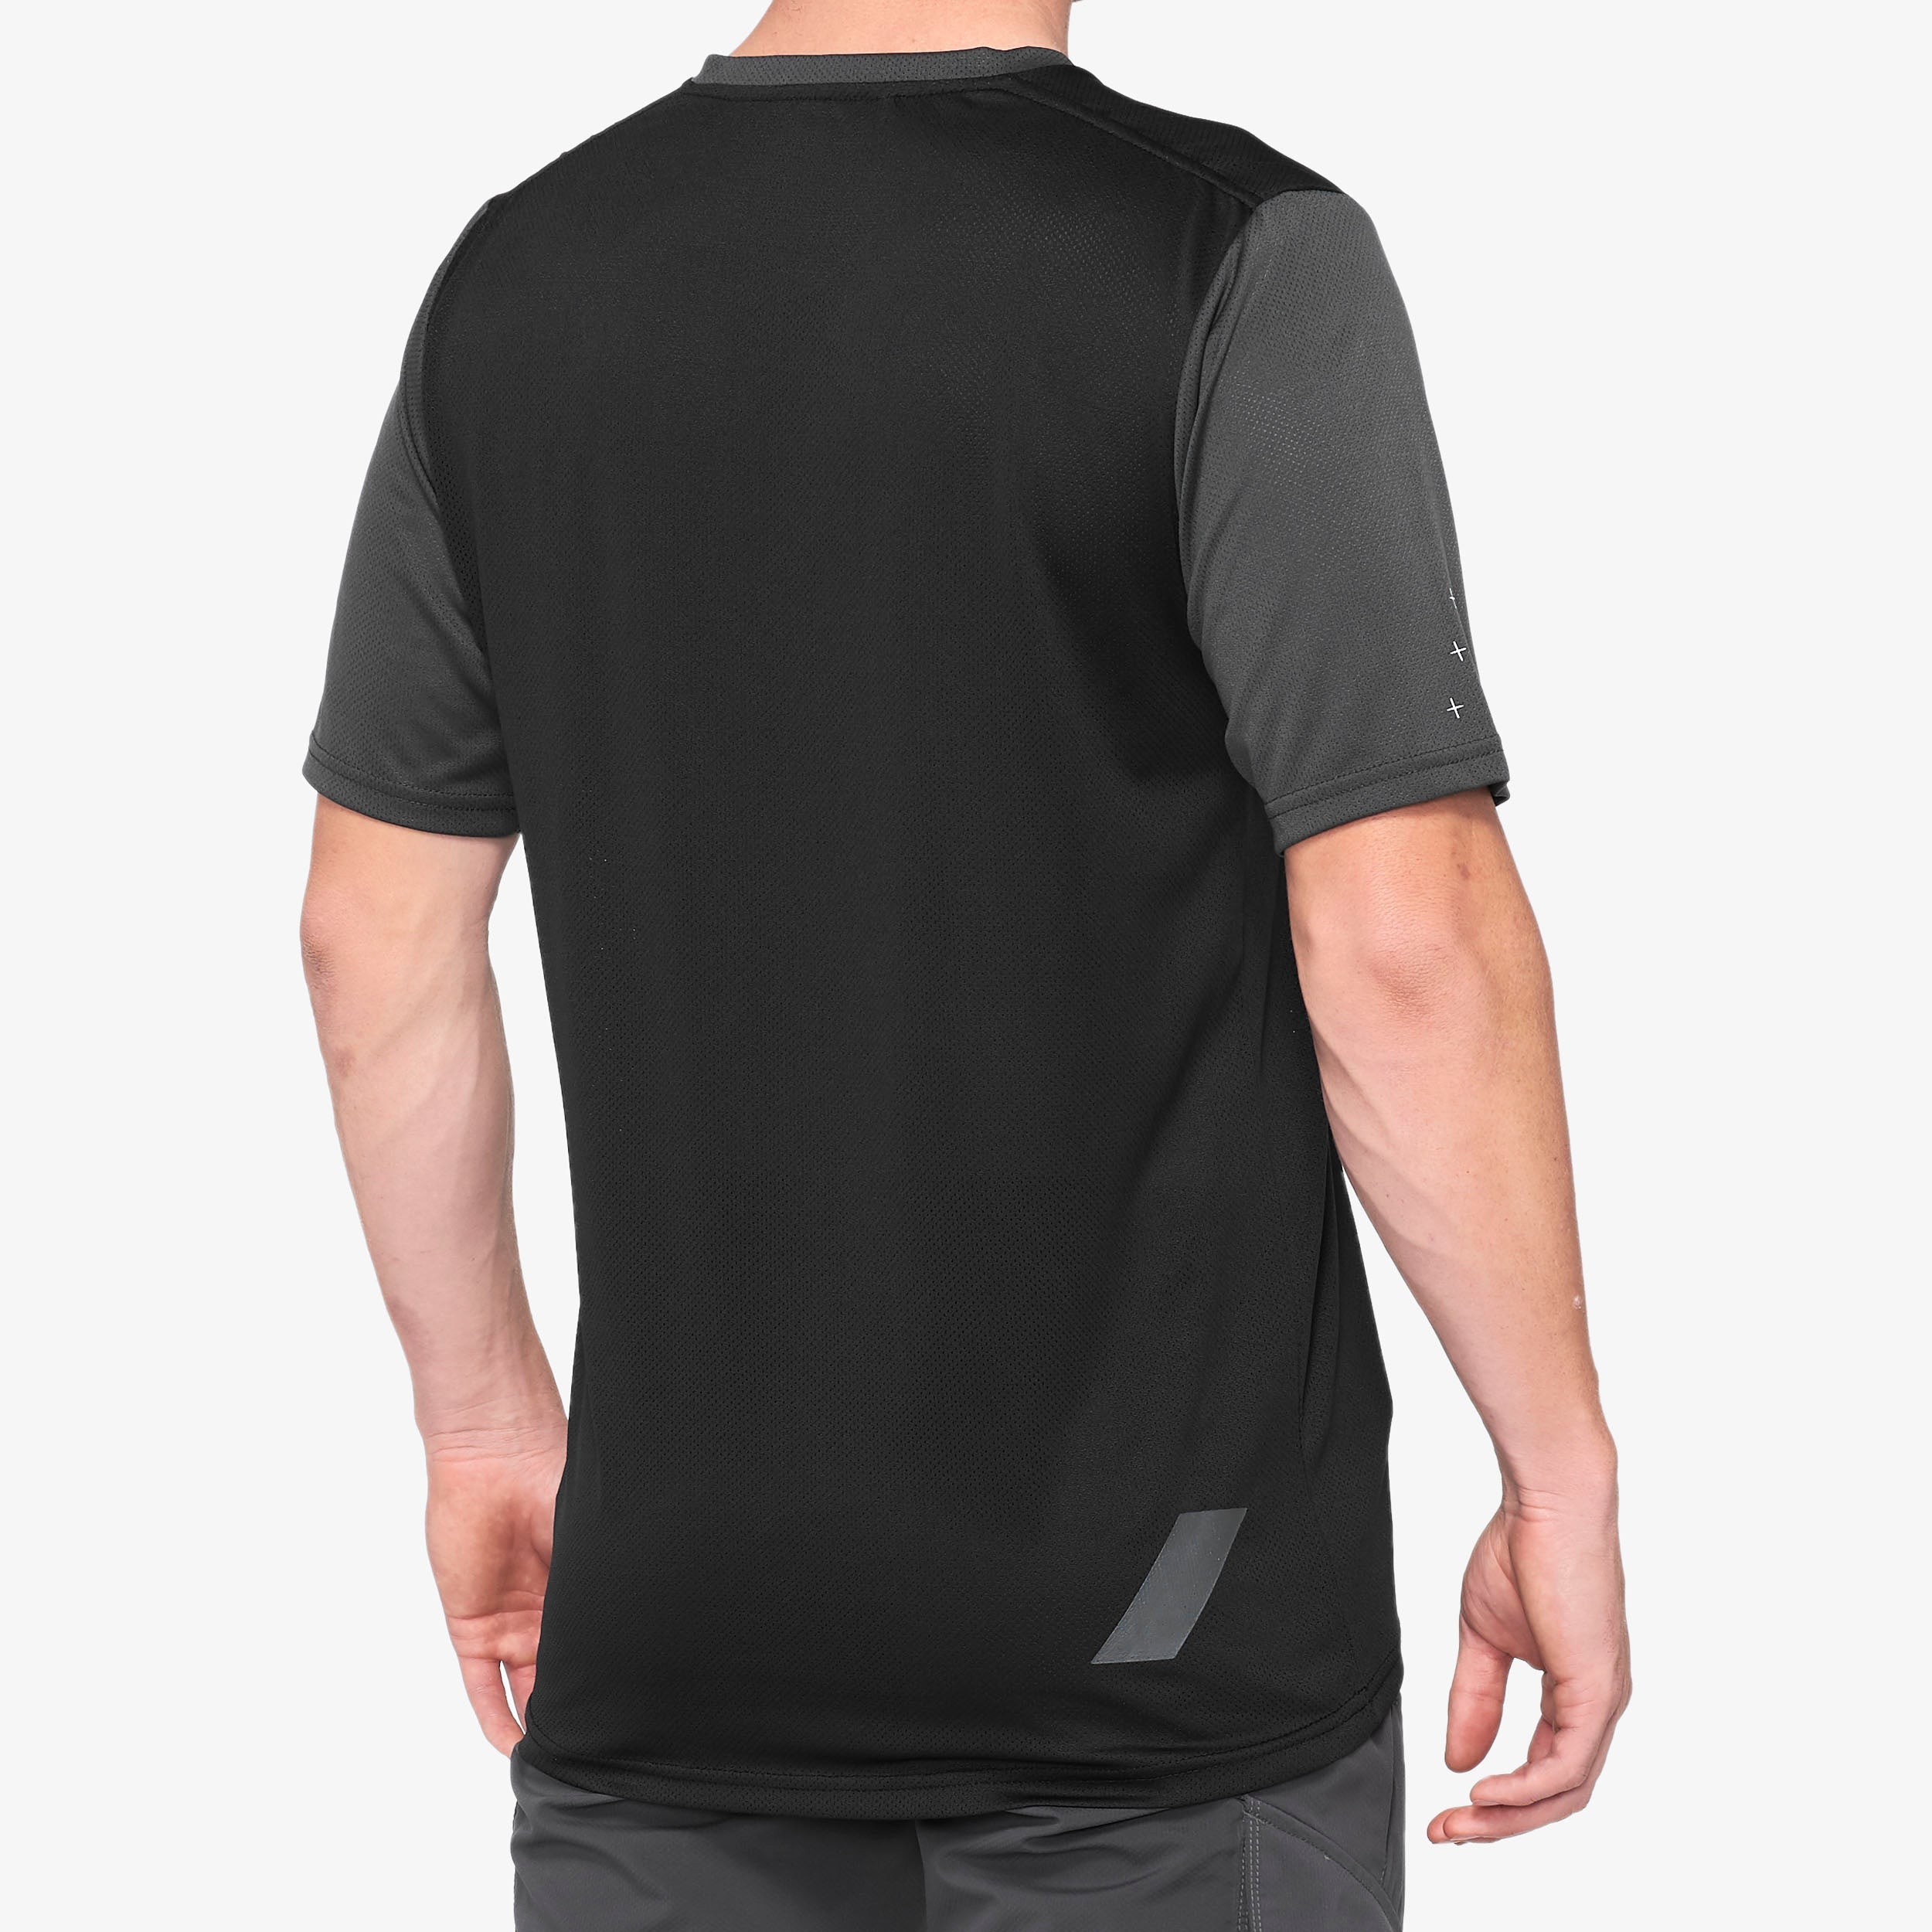 RIDECAMP Jersey Charcoal/Black - Secondary